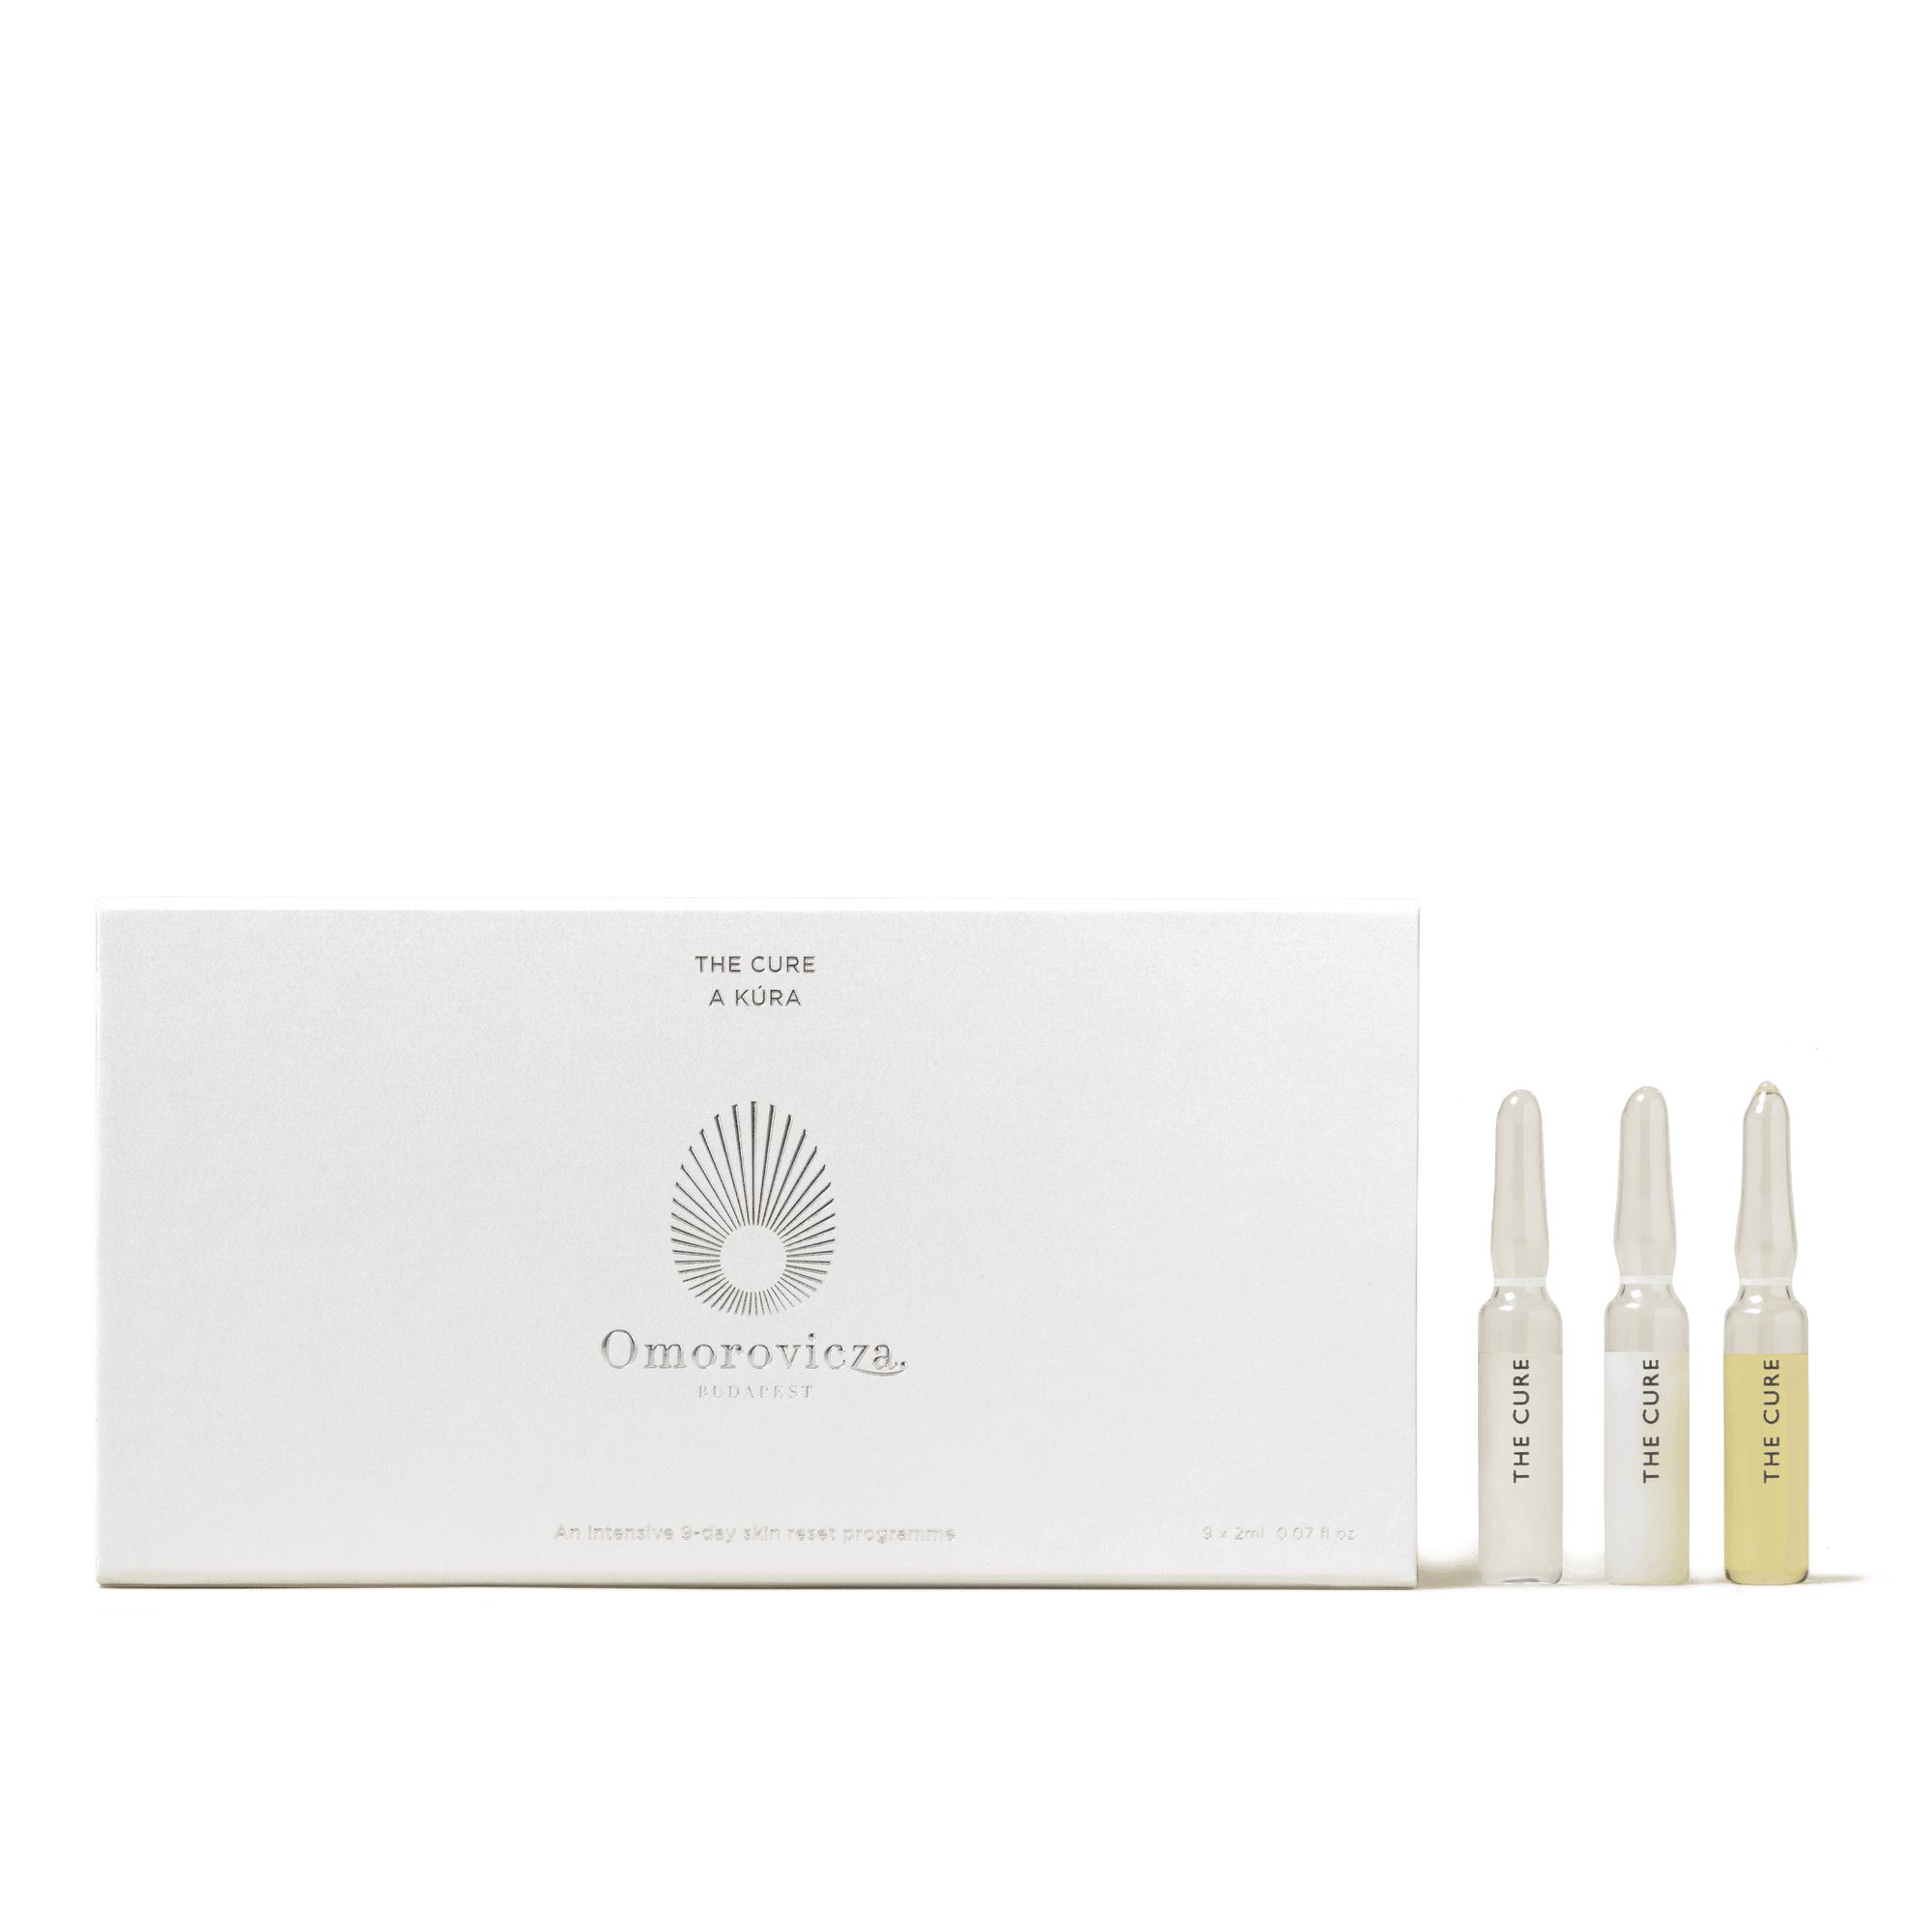 The Cure is an intensive 9-day ampoule programme